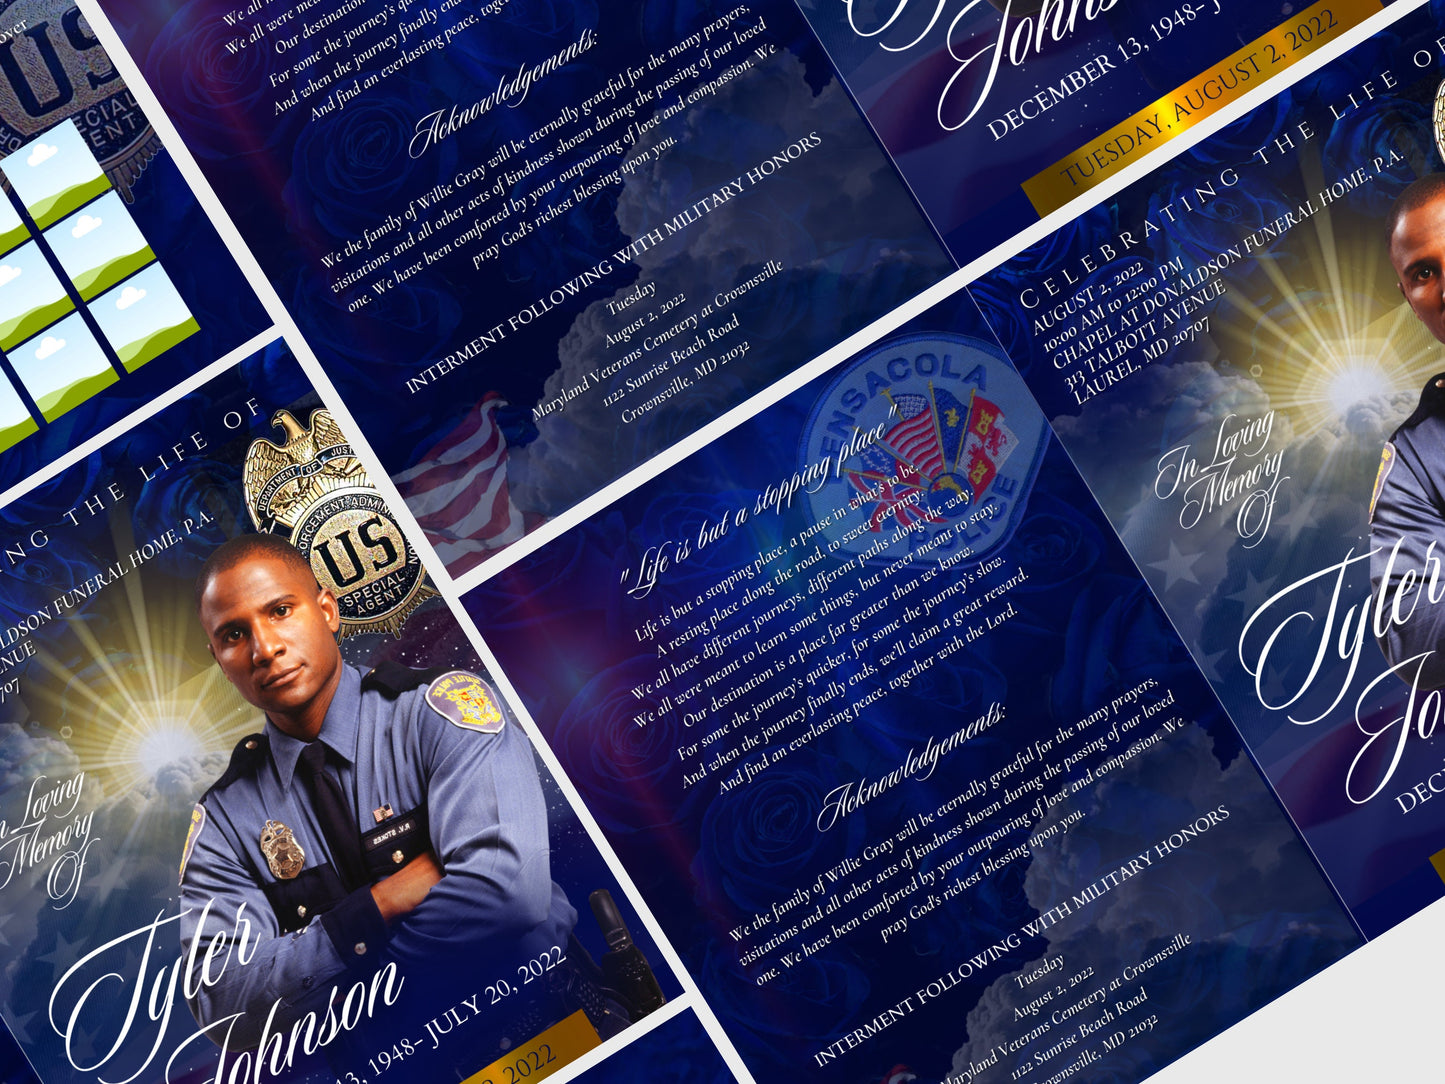 8.5x11" LAW ENFORCEMENT Memorial program (4 pages)|Blue Funeral Program |Celebration of Life|Keepstakes obituary Program, In loving memory